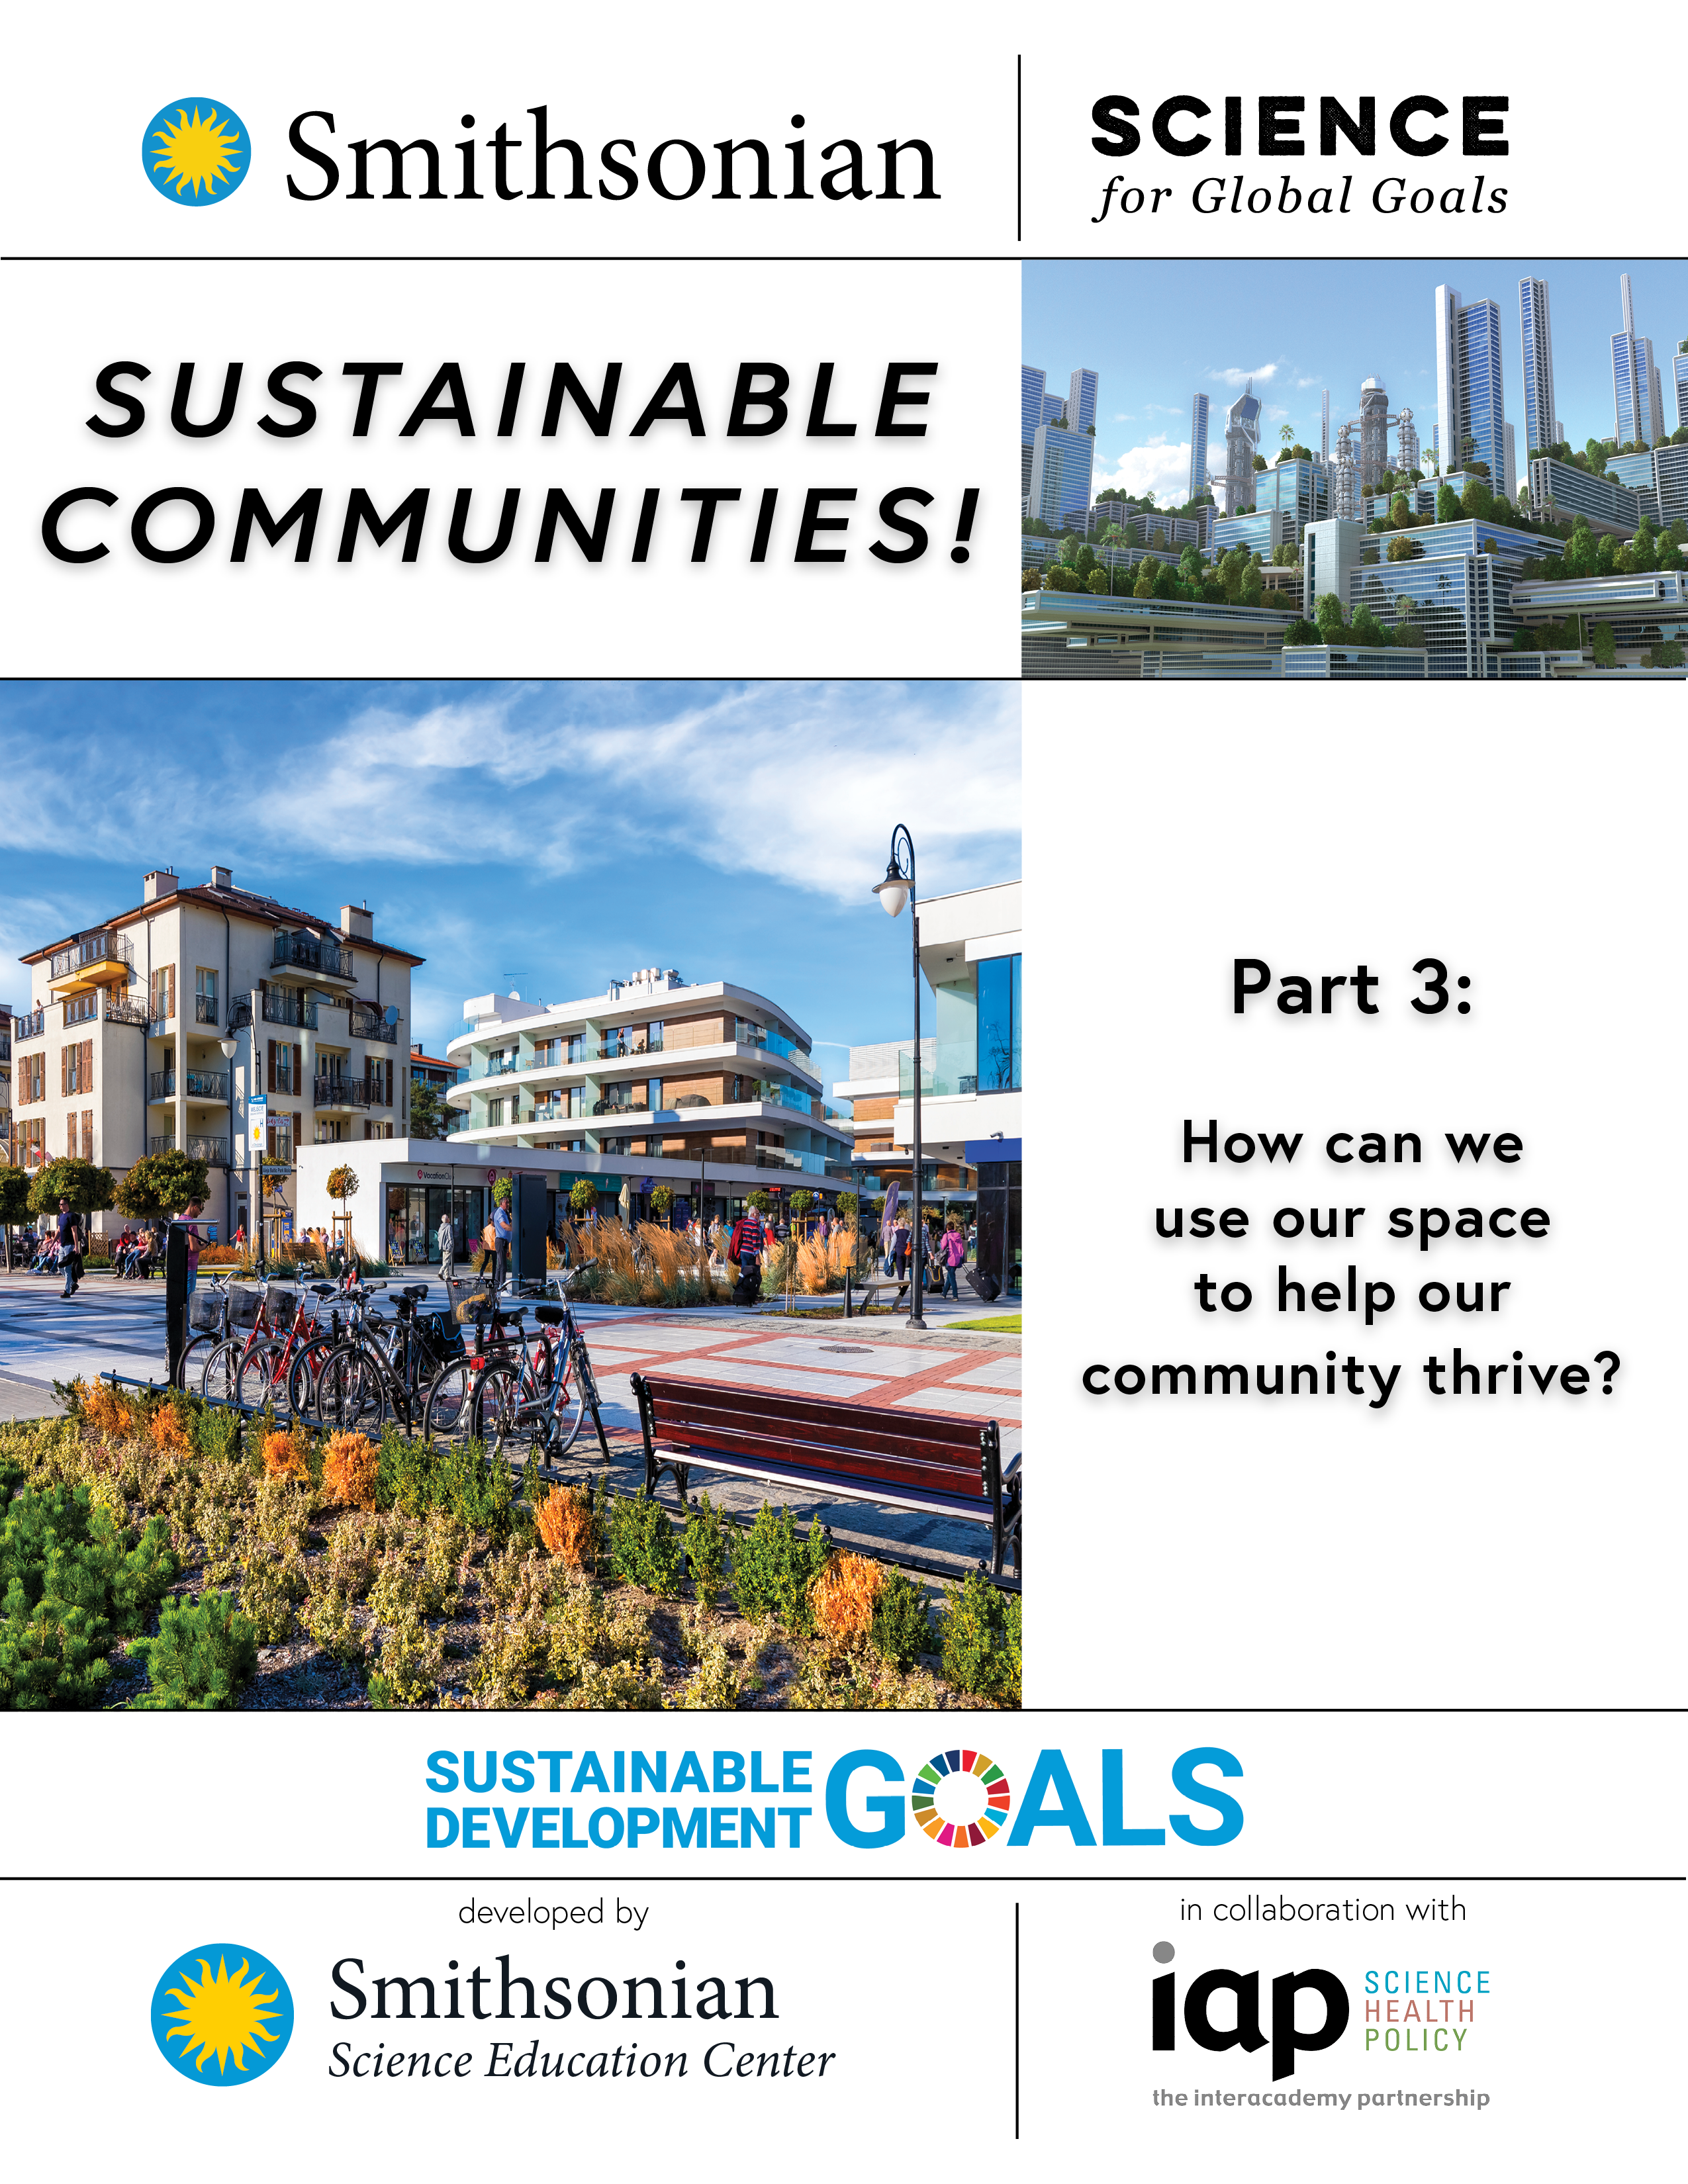 Part 3 for Sustainable Communities